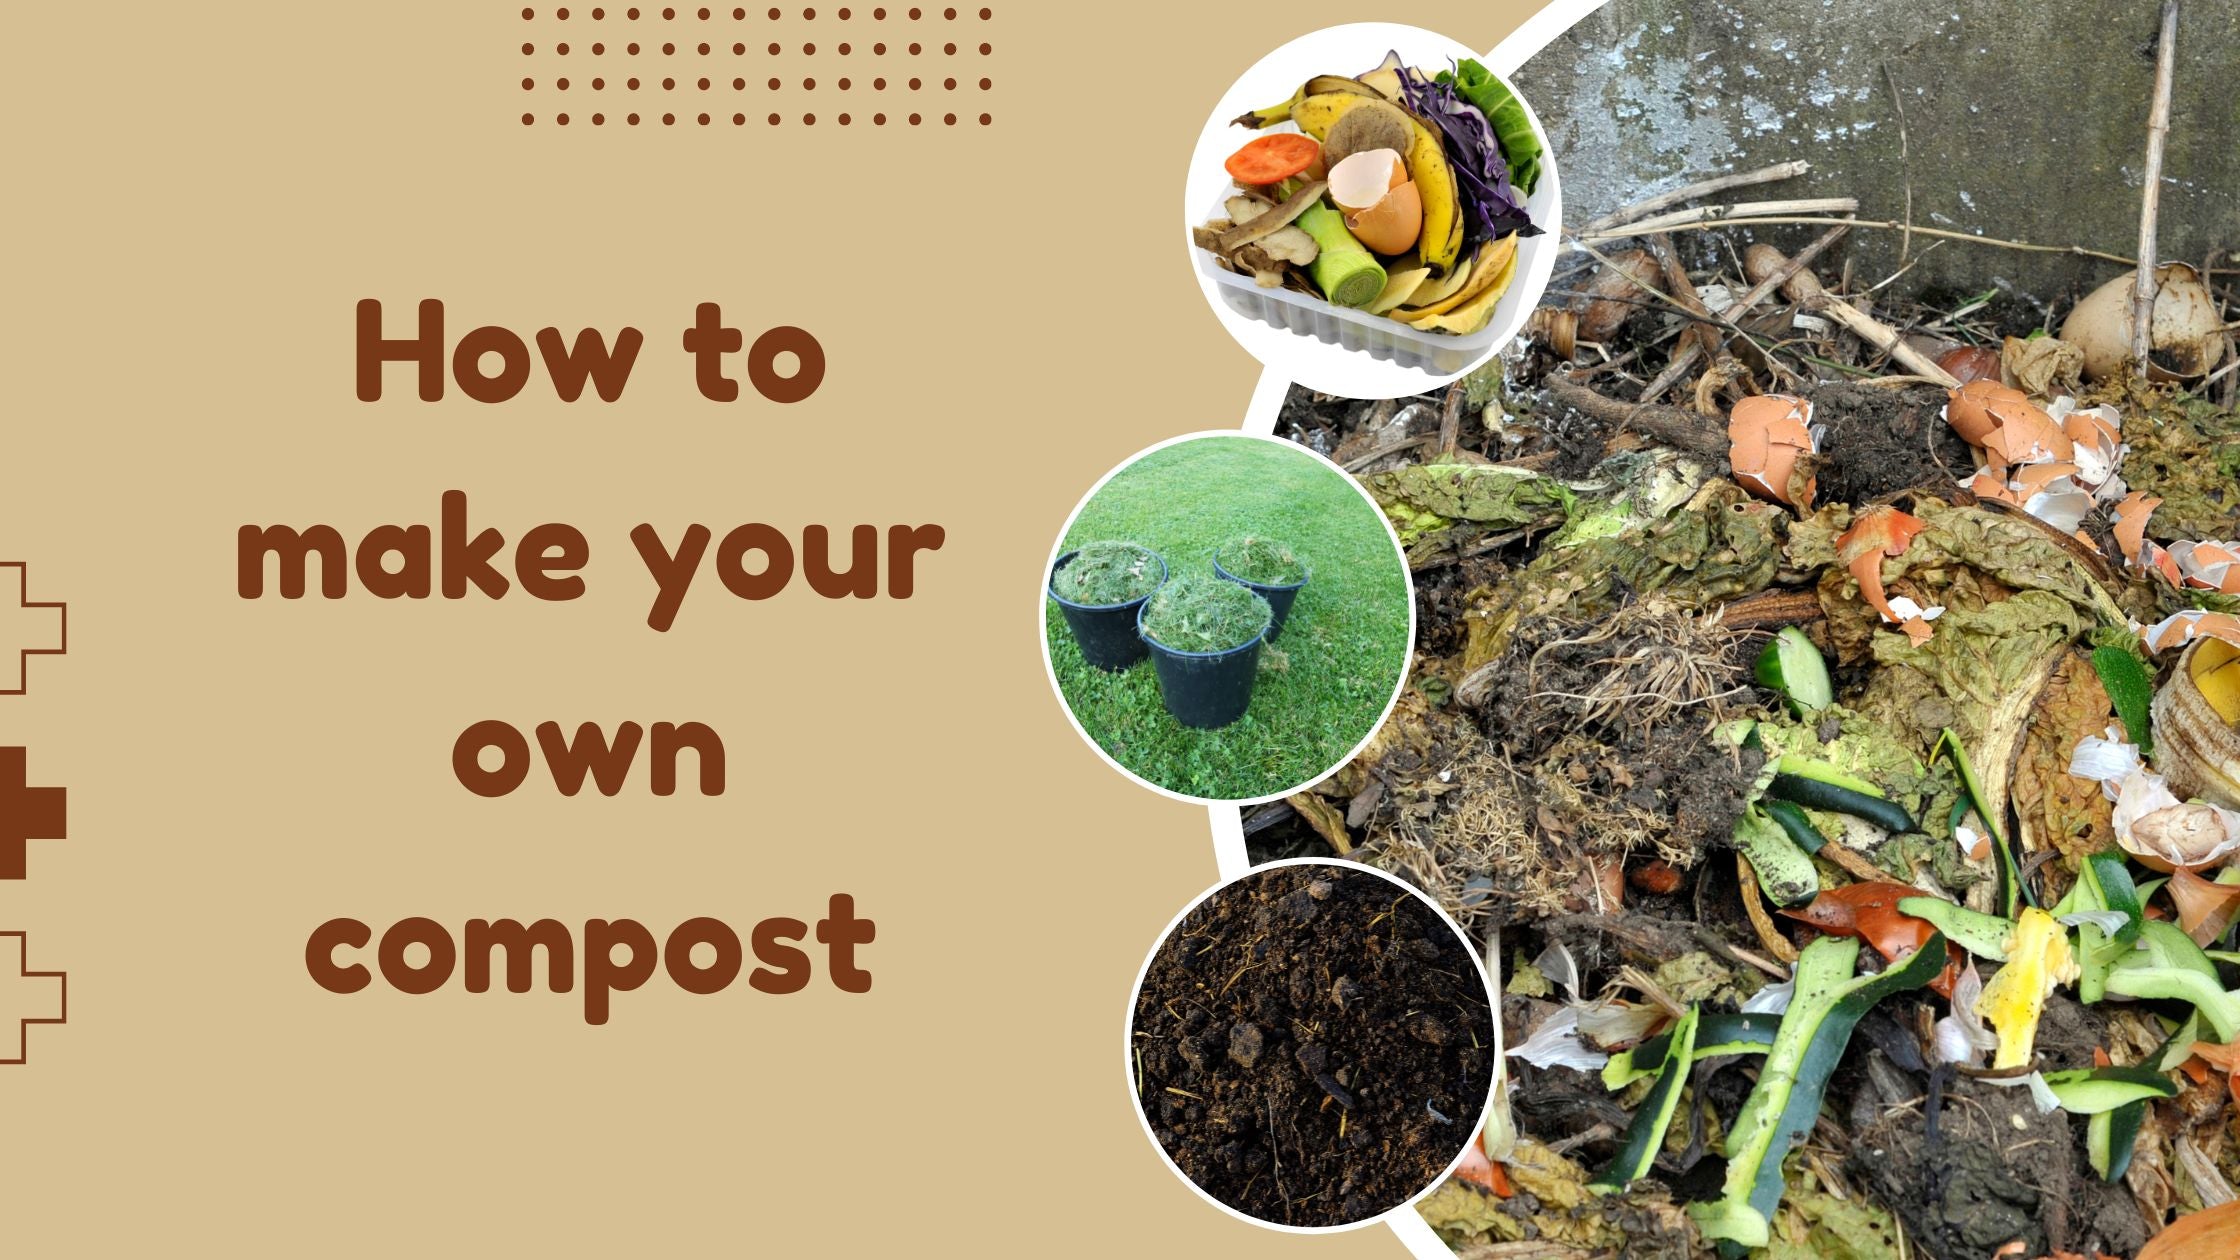 DIY: Make your own compost at home - iFOREST - International Forum for  Environment, Sustainability & Technology